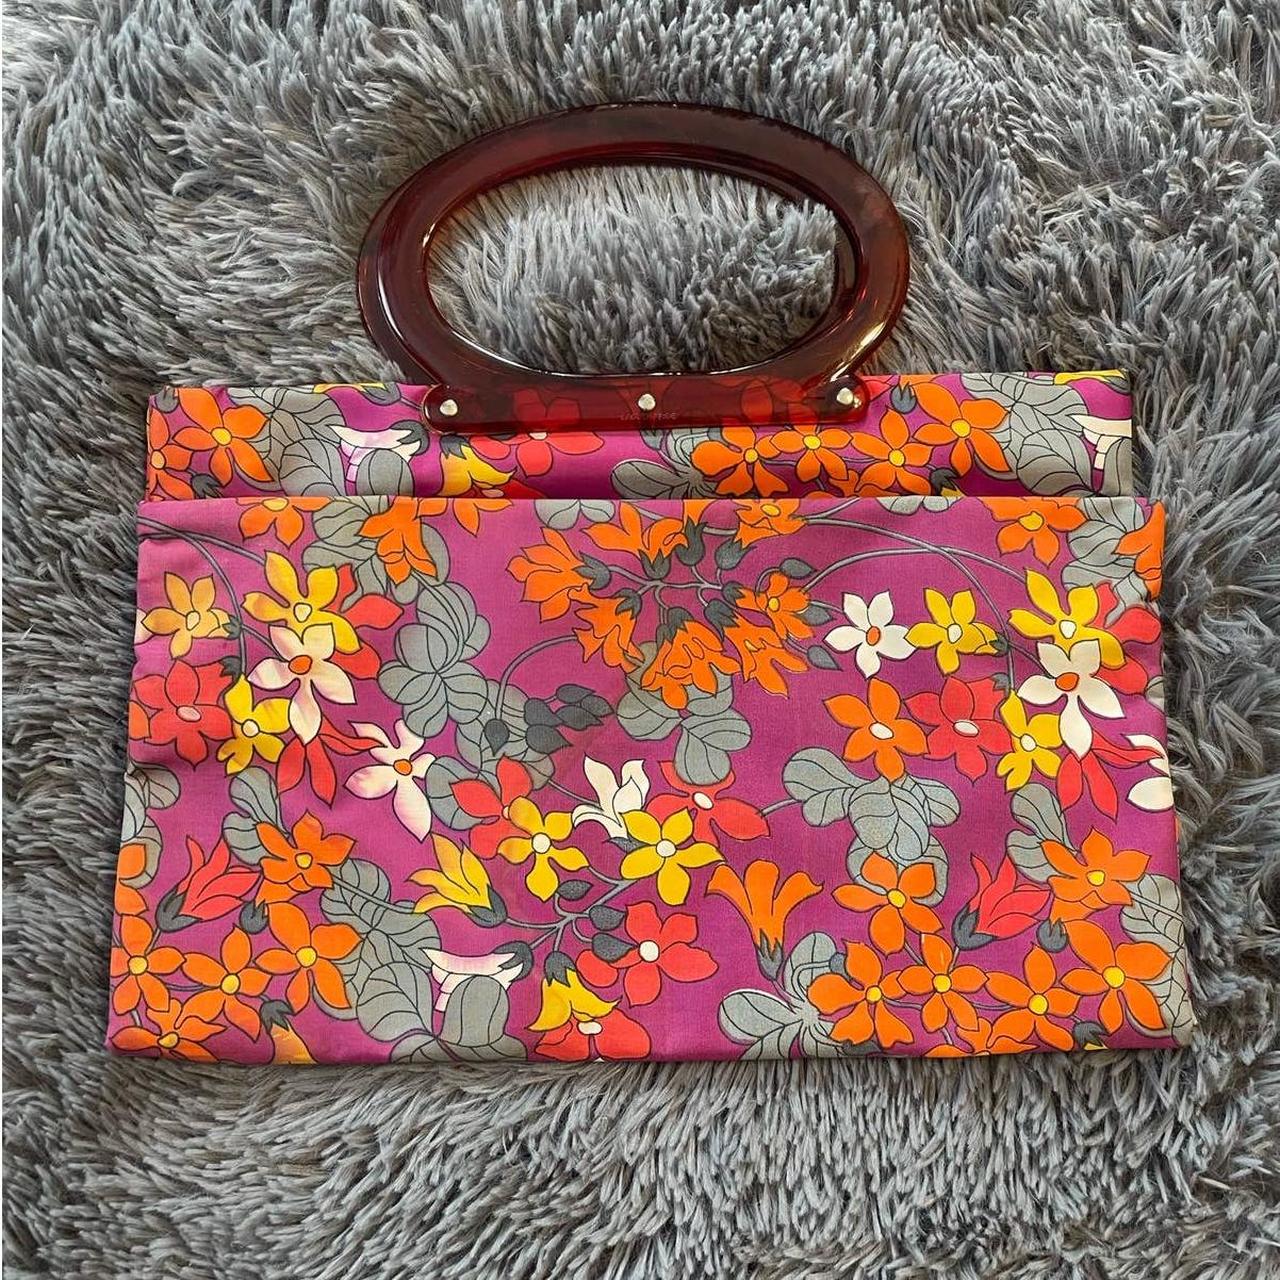 American Vintage Women's Going Out Bag